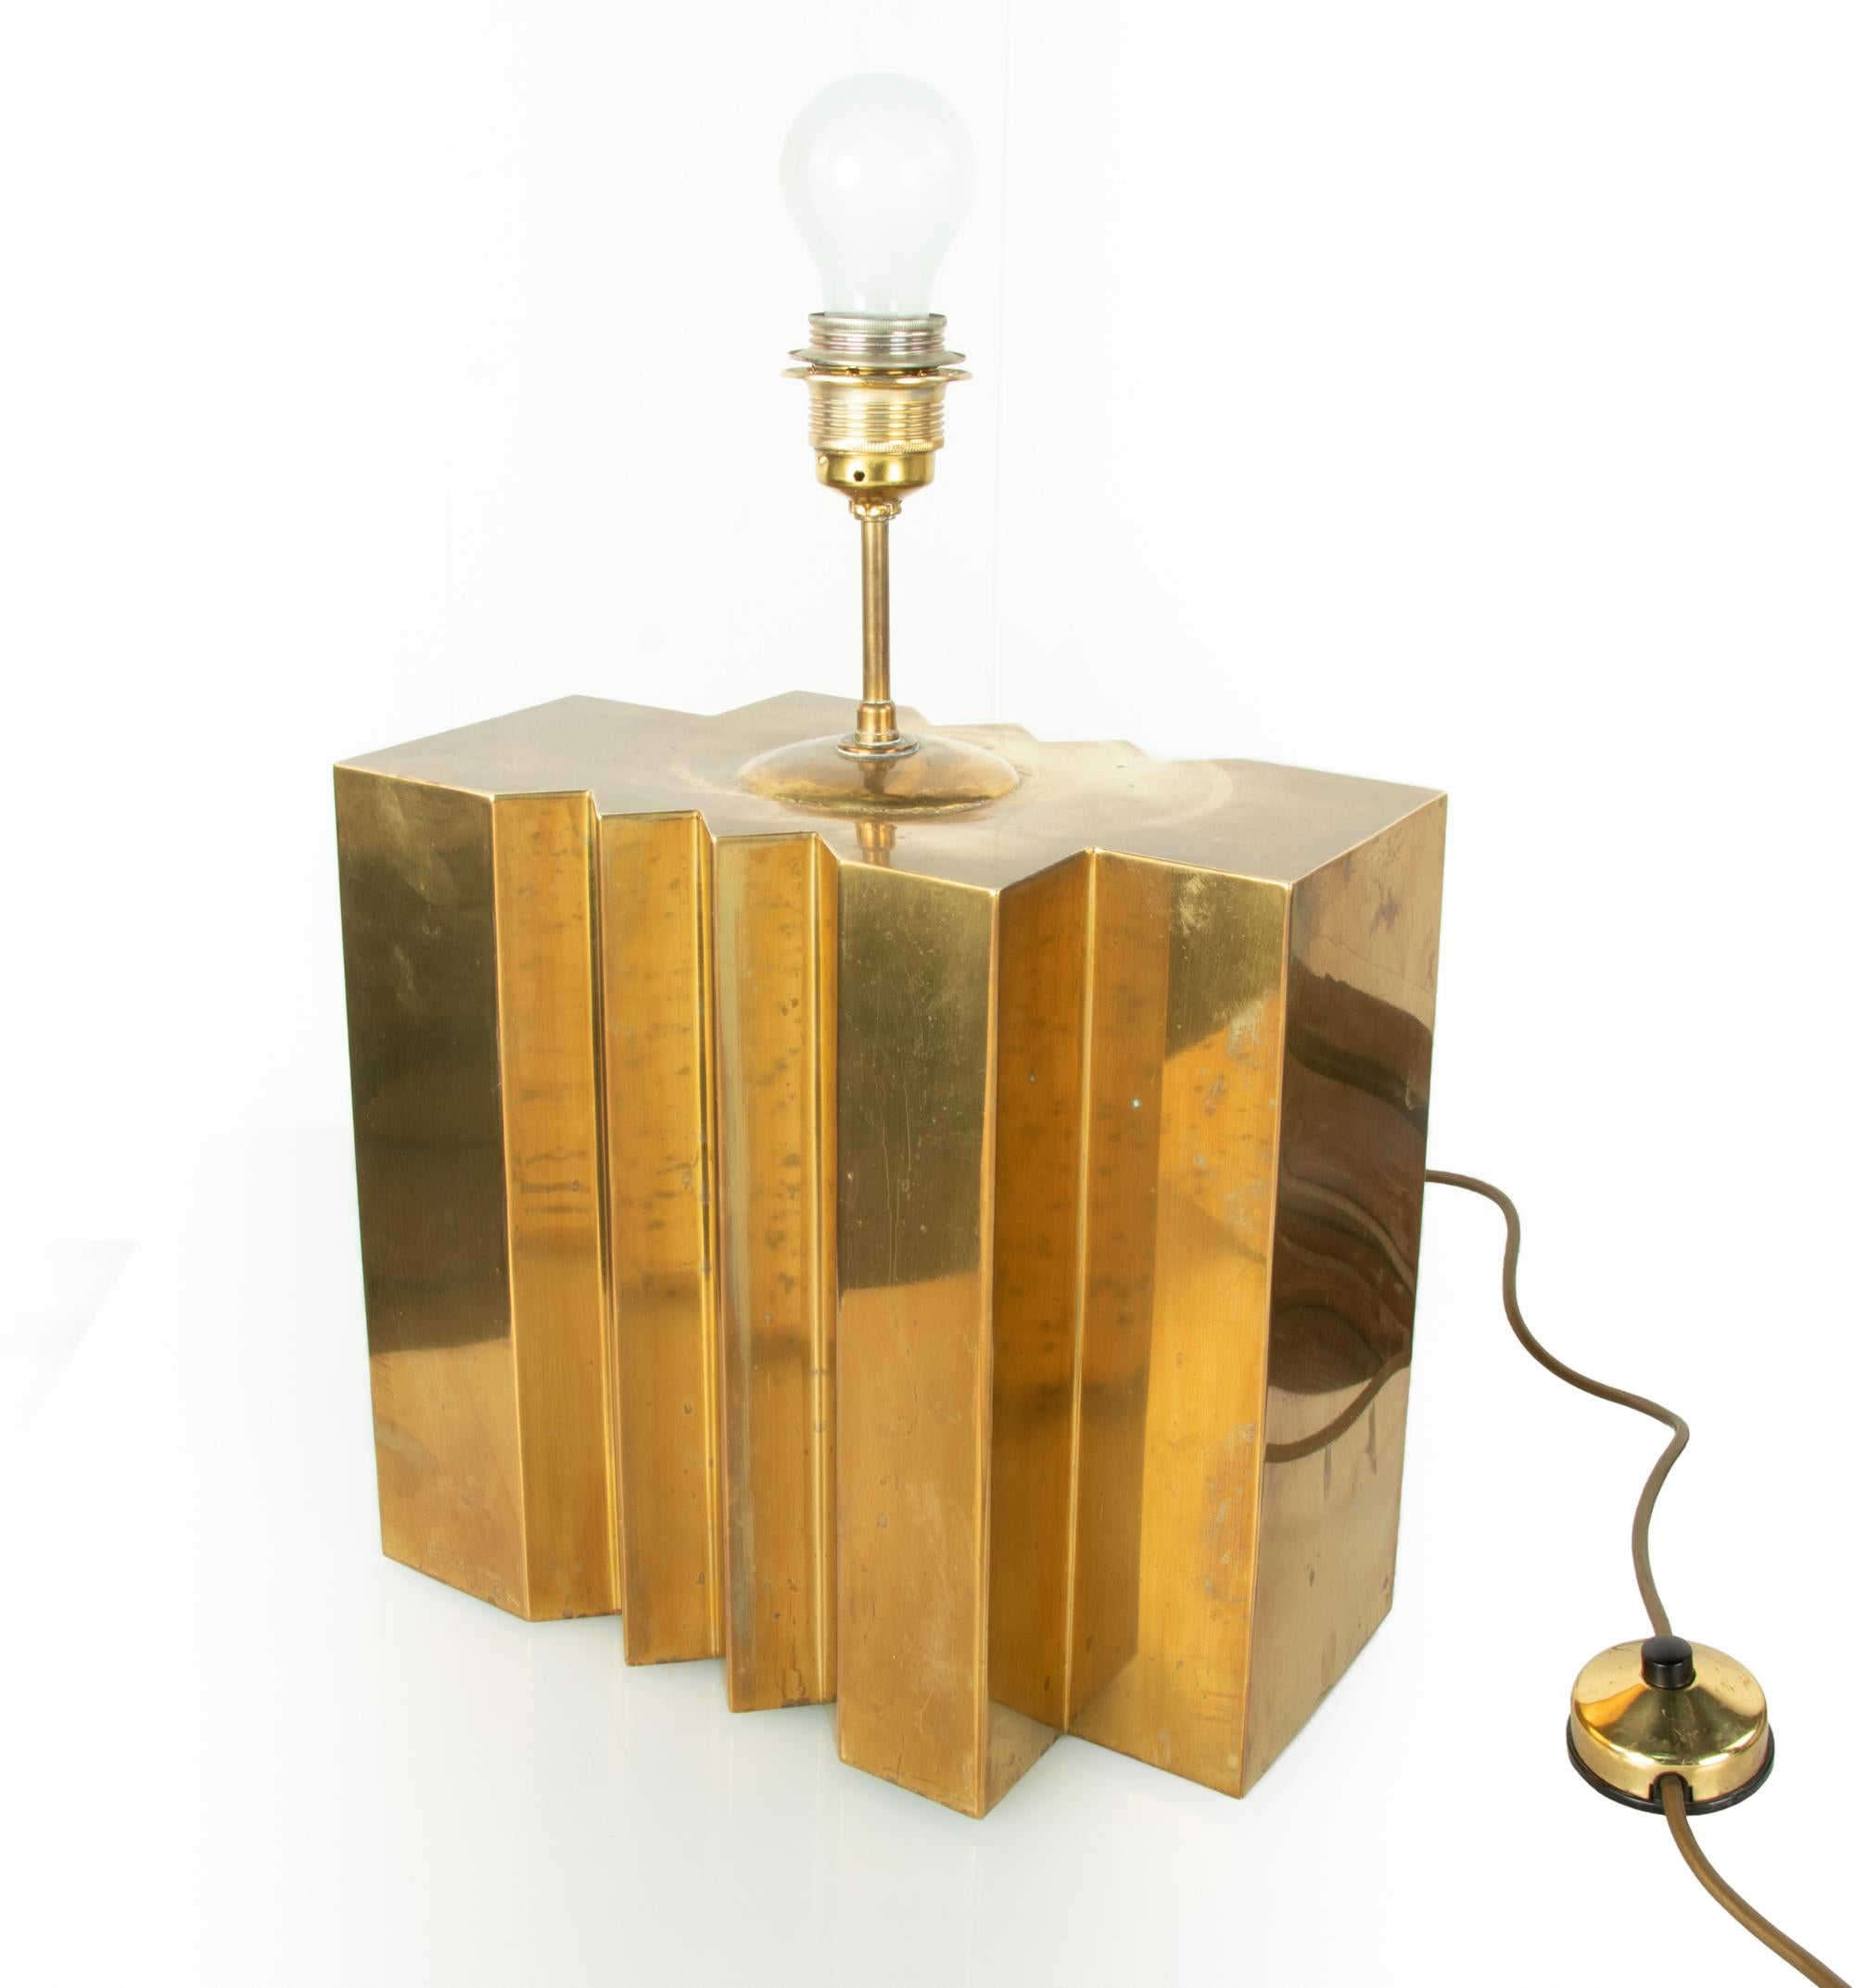 Exceptional 1970s handcrafted design table lamp base by G. Autier, France. 
High quality geometrical brass sculpture.
Incised signature G Autier

Measures: Brass body height 11.4